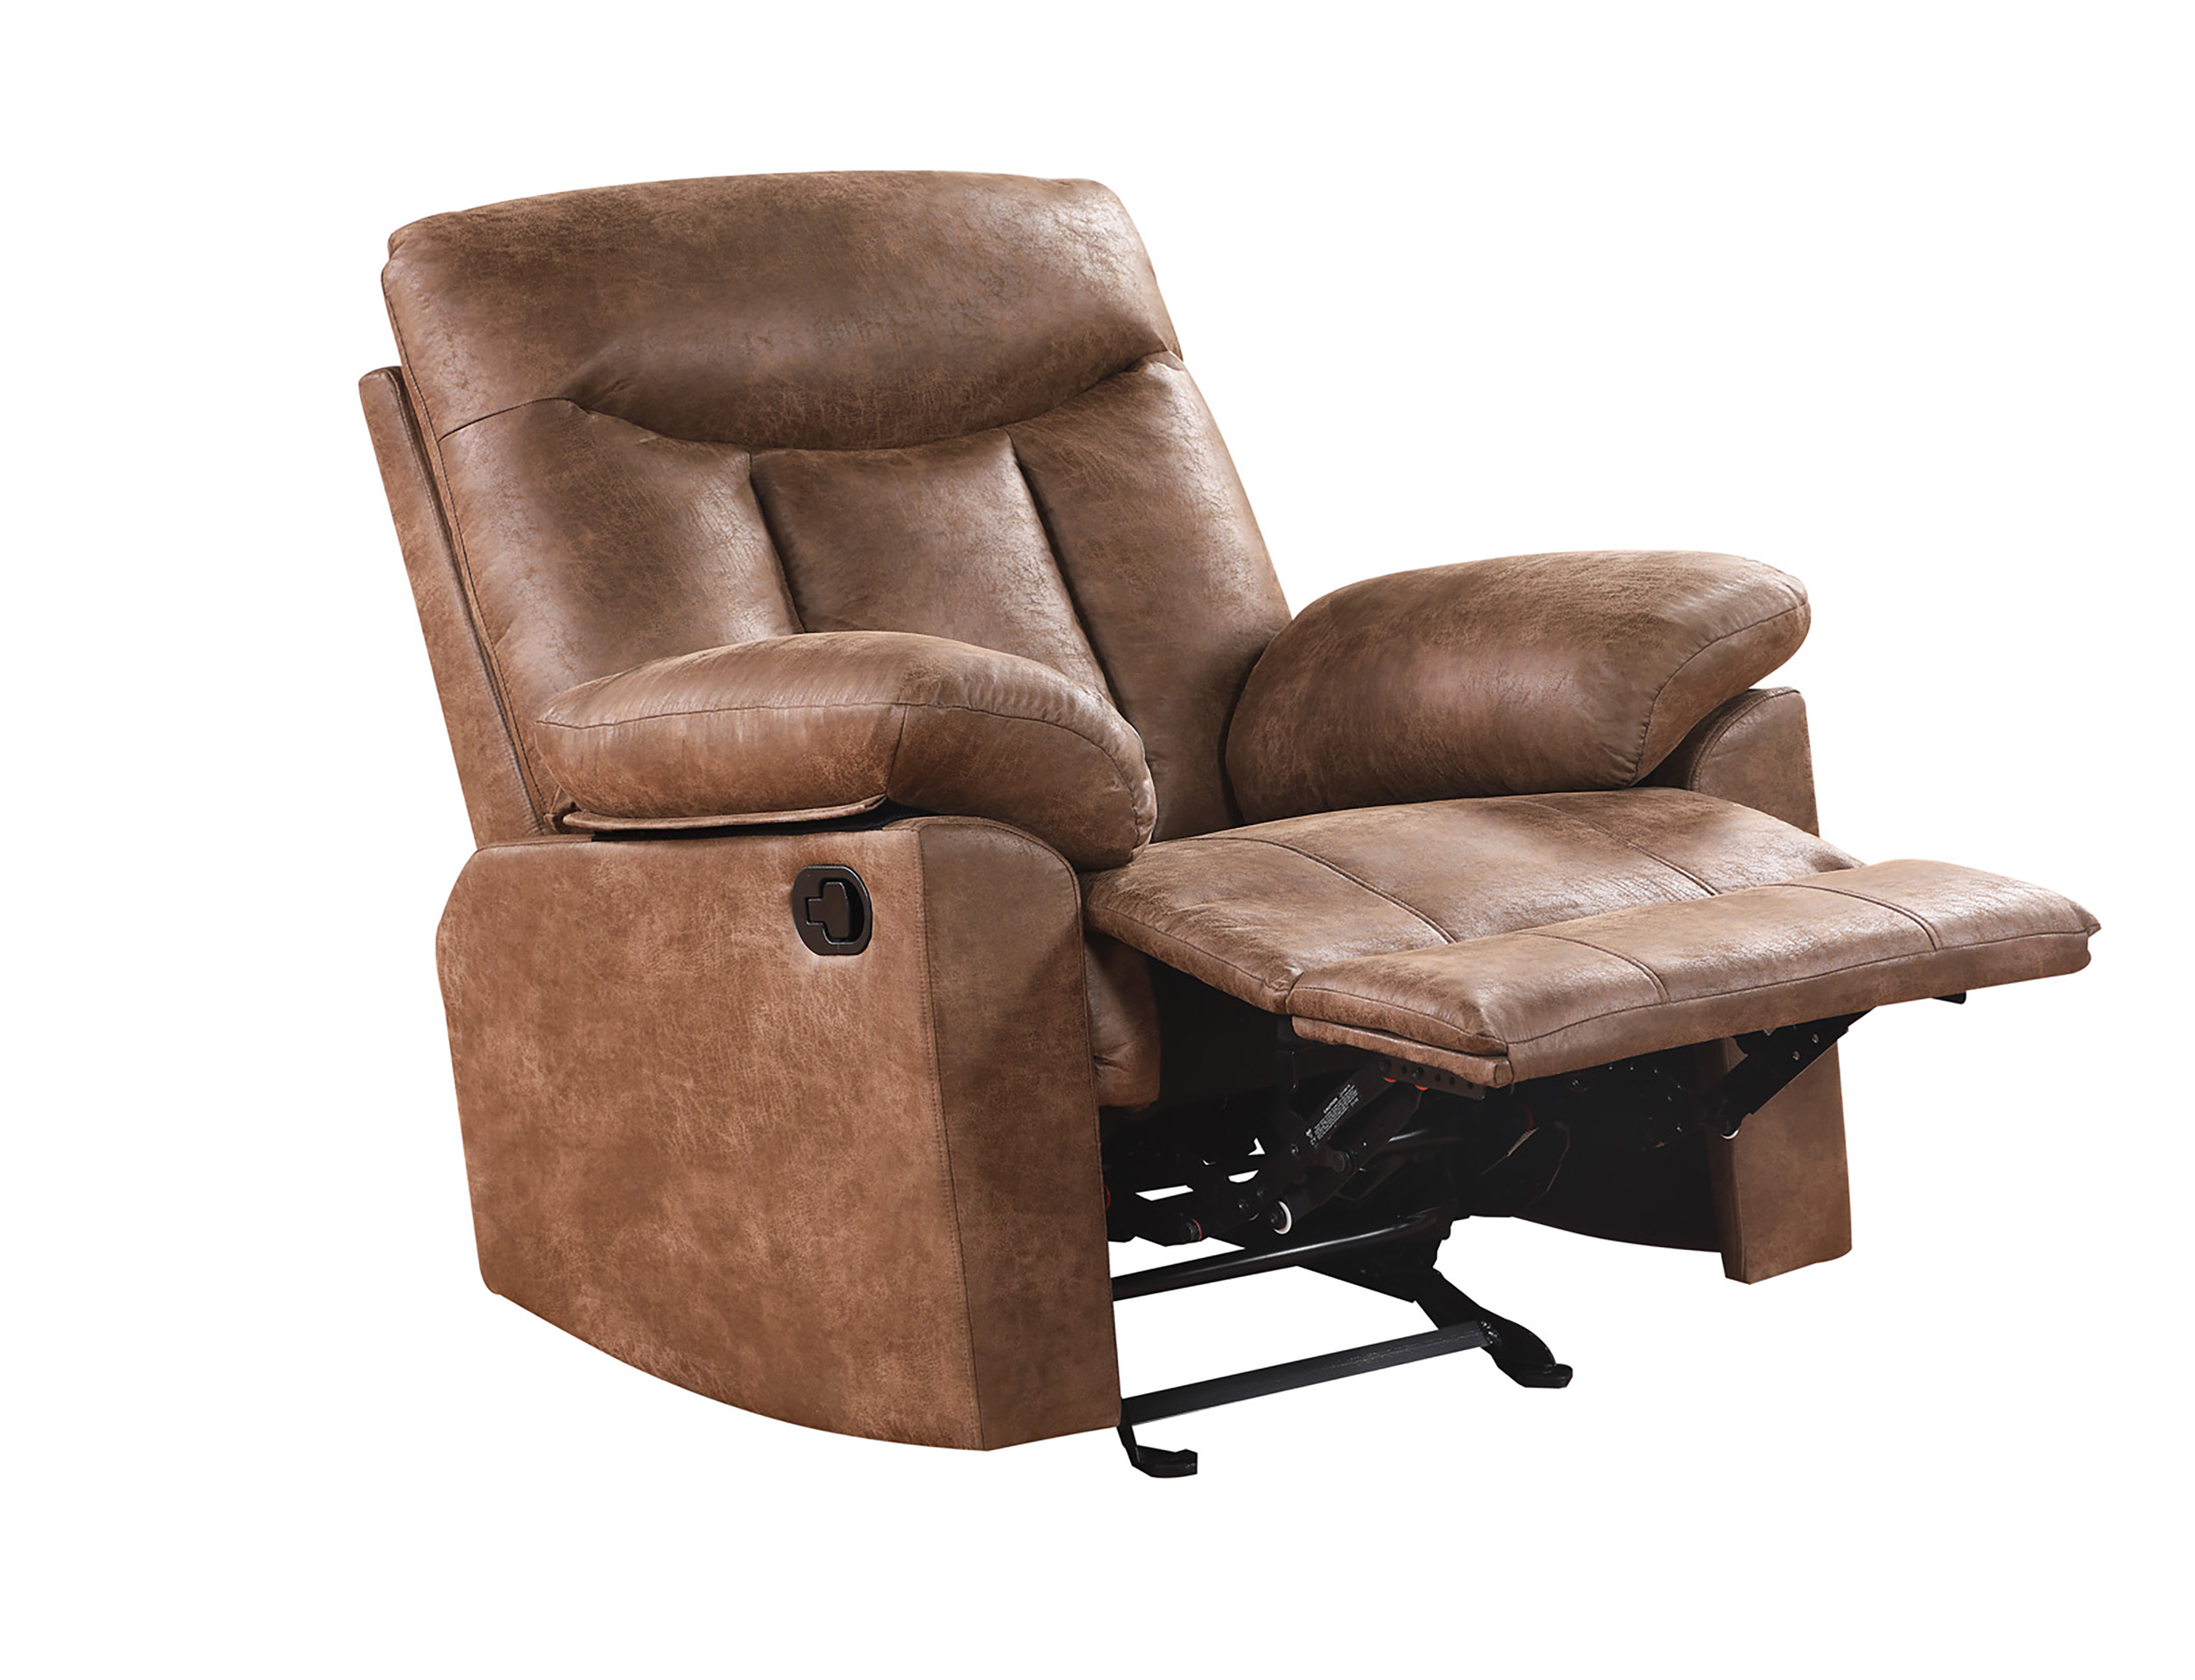 Becket Big and Tall Memory Foam Rocker Recliner W/USB Vintage Brown, Supports up to 500 lbs - image 5 of 10